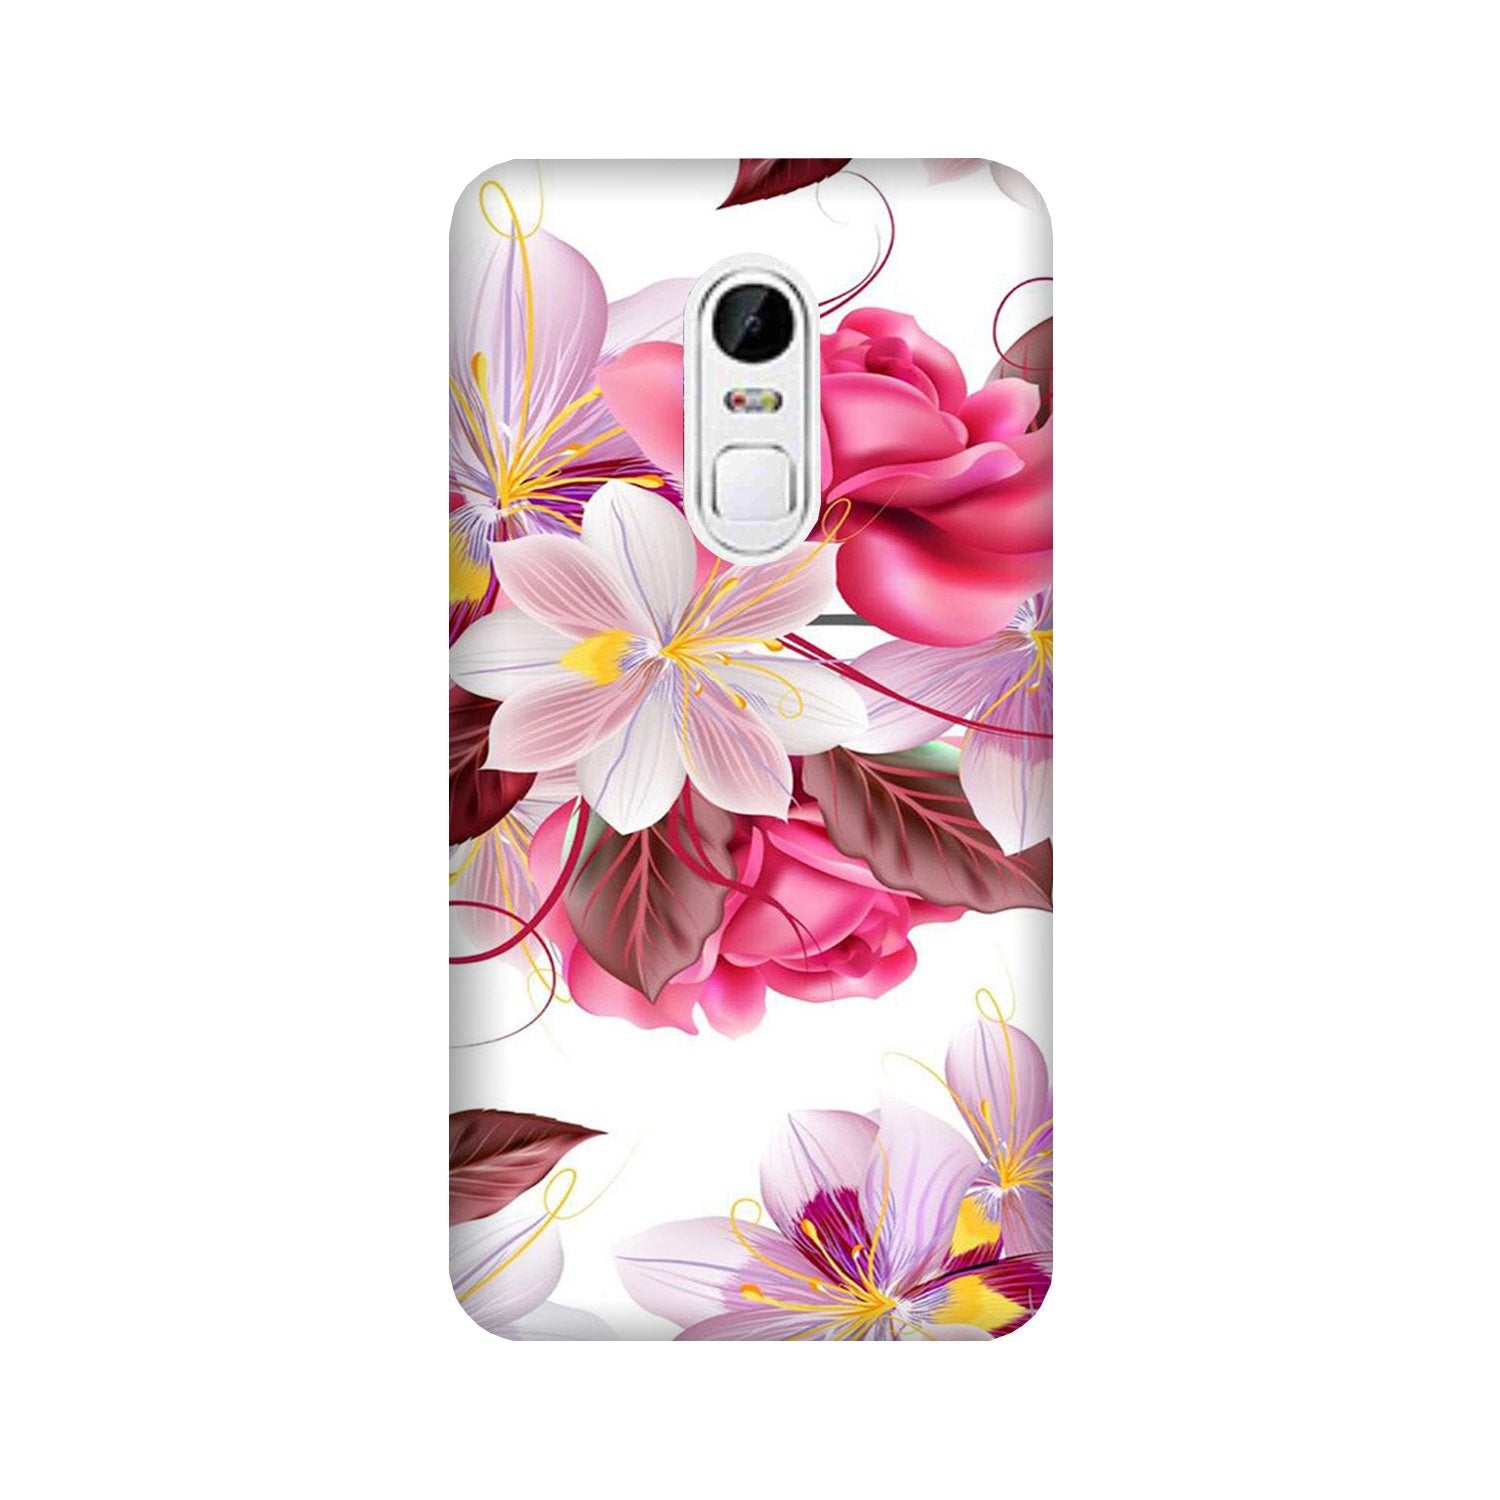 Beautiful flowers Case for Lenovo Vibe X3